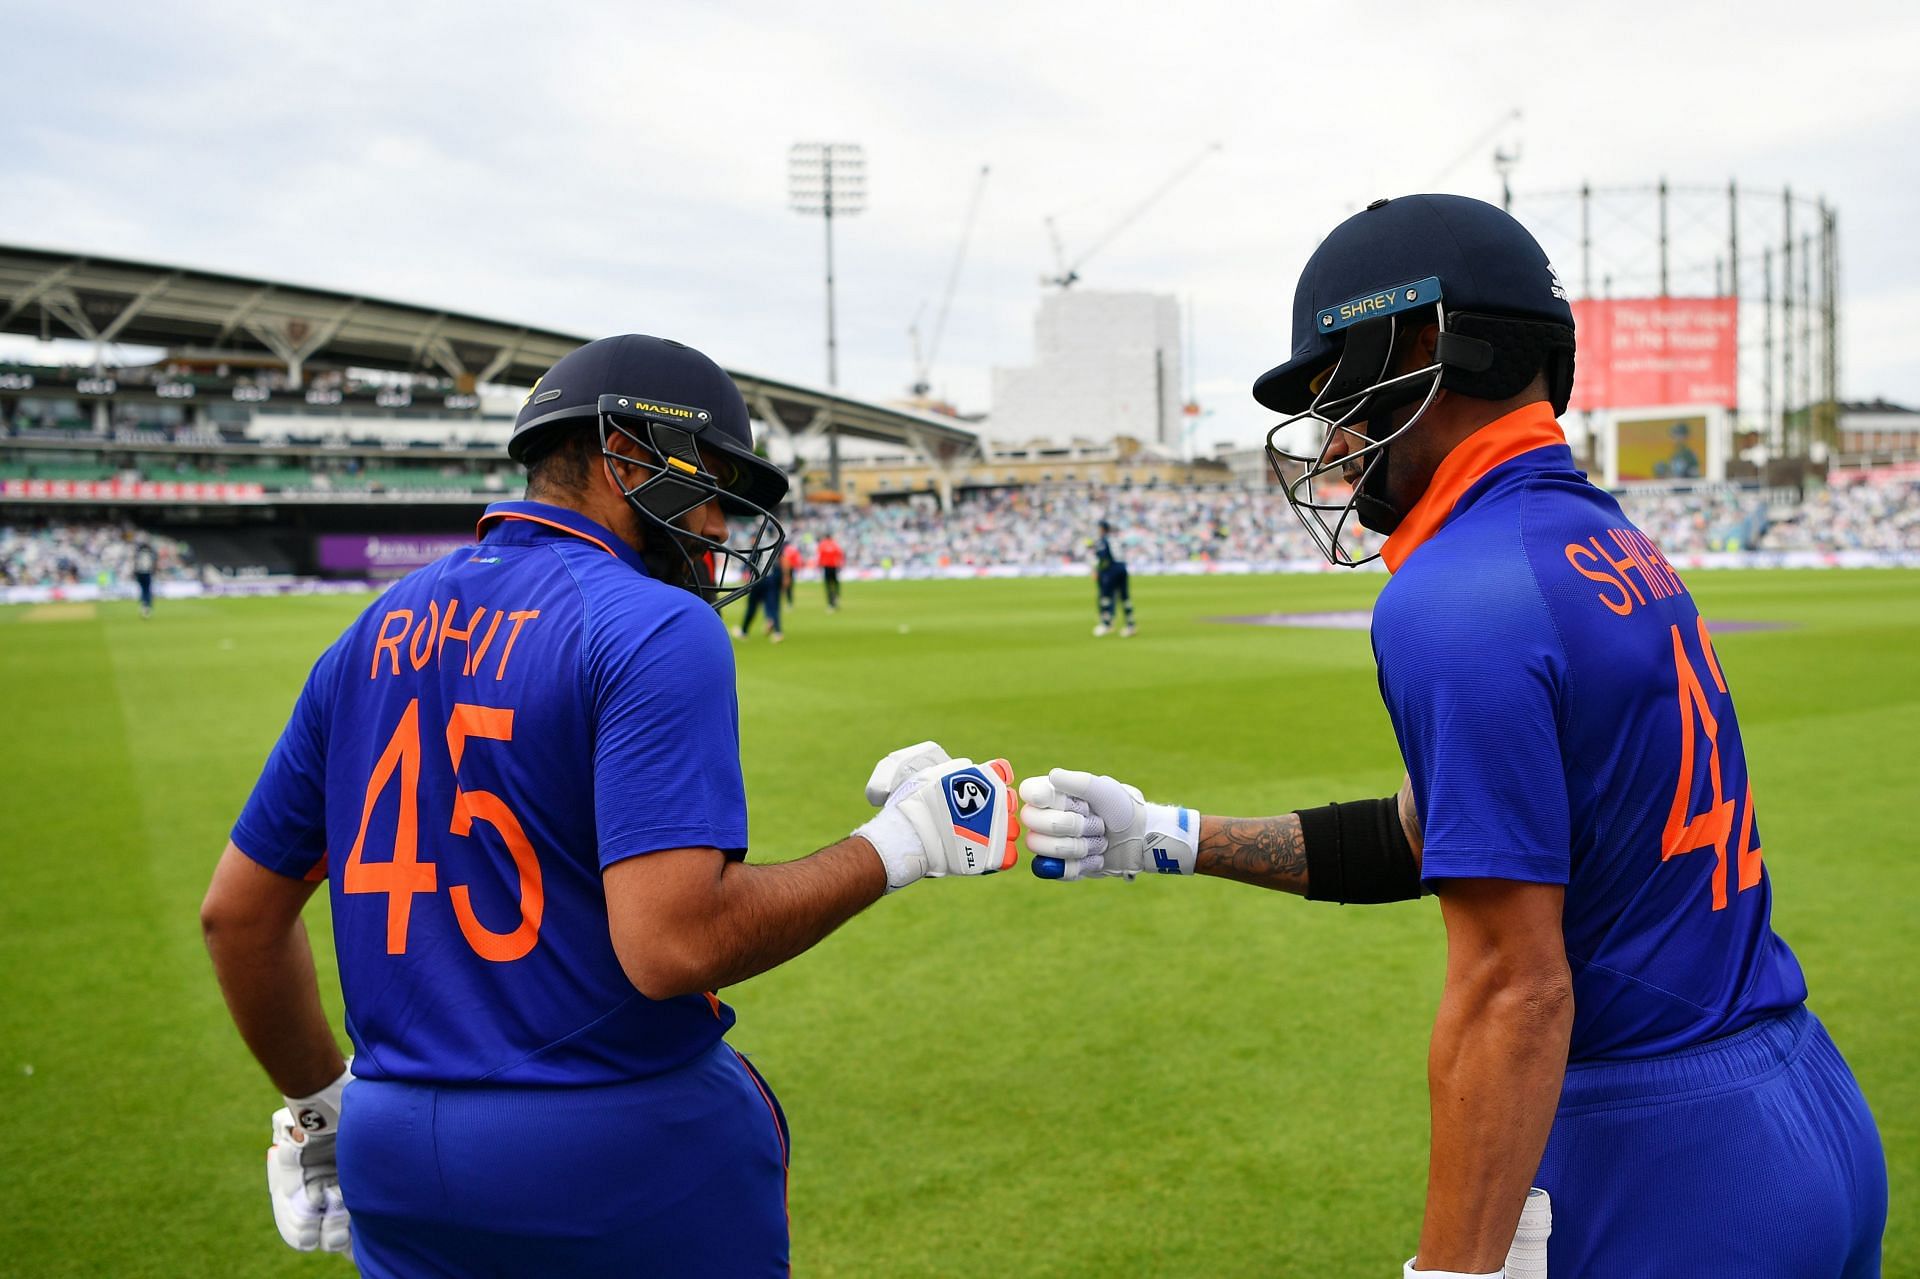 Rohit and Dhawan have formed a prolific partnership at the top of the order for India in ODIs